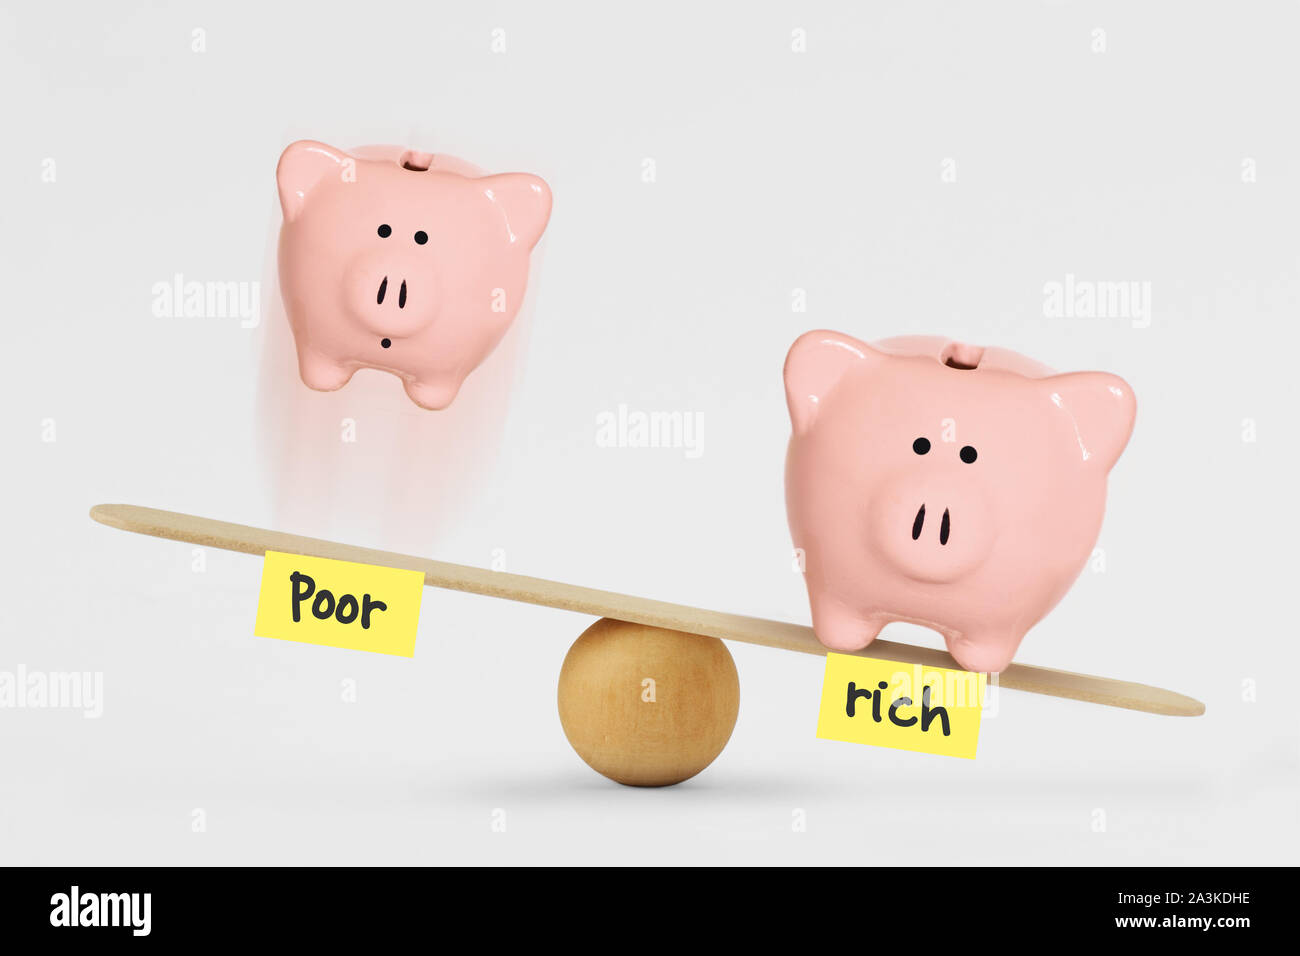 oor and rich piggy bank on balance scale - Concept of social inequality between rich and poor Stock Photo